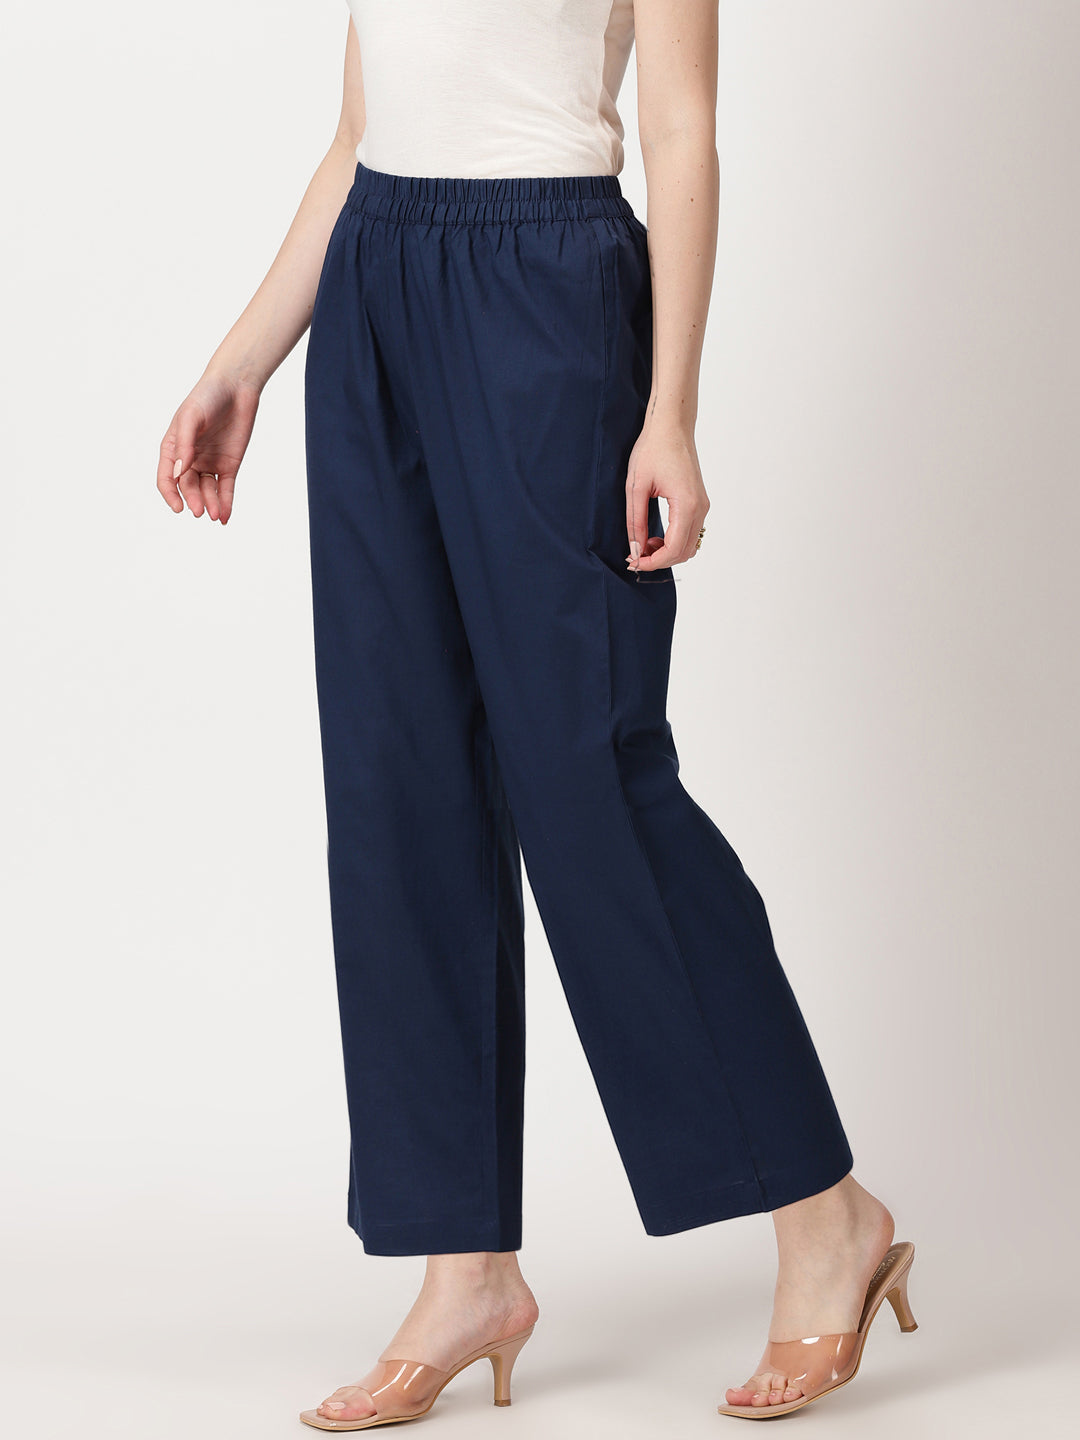 Navy Blue Solid Cotton Palazzos